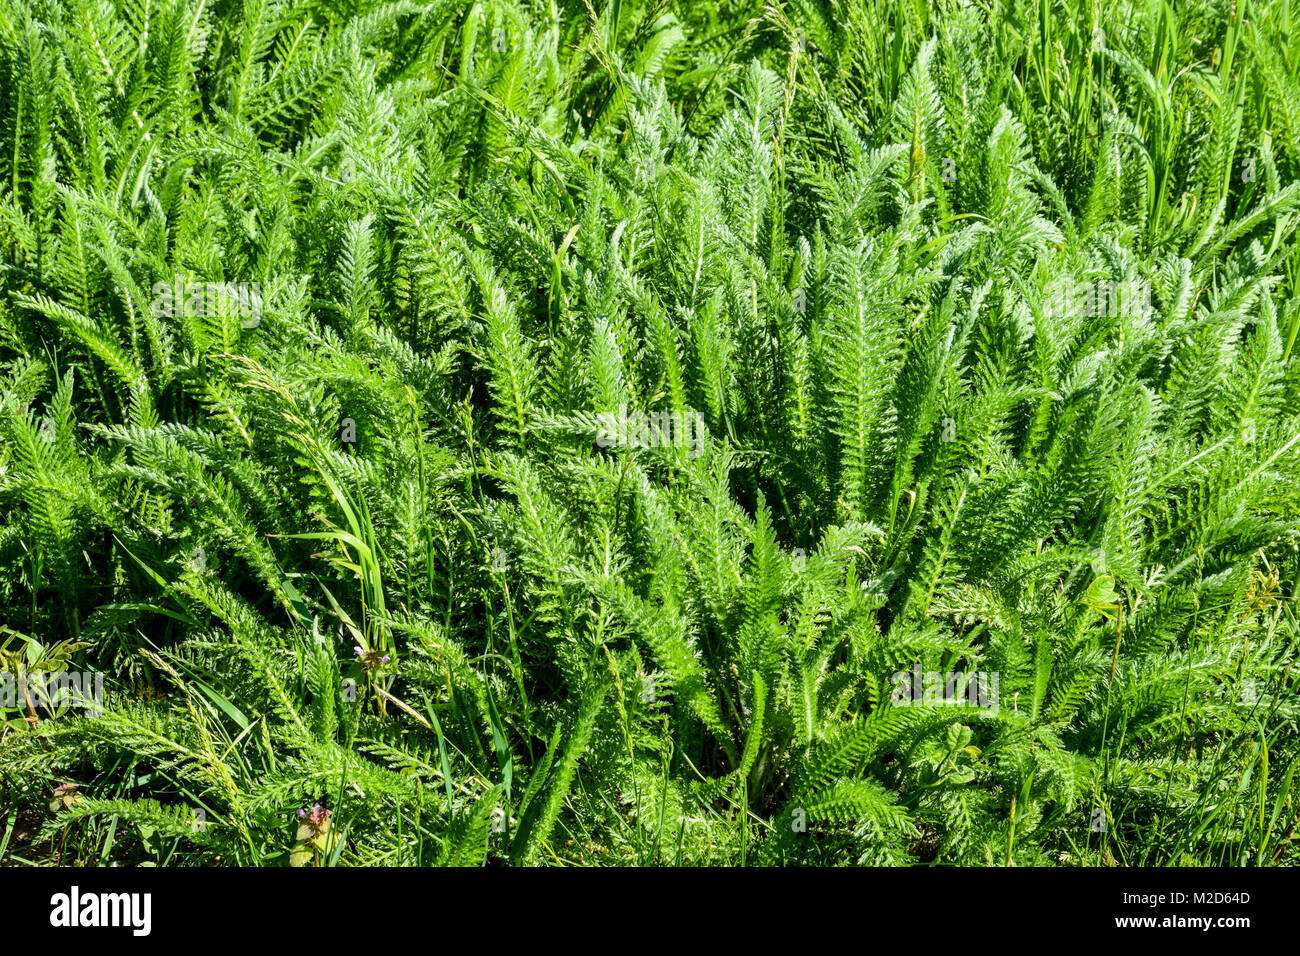 Achillea millefolia spring shoots and leaves of a young plant Stock Photo